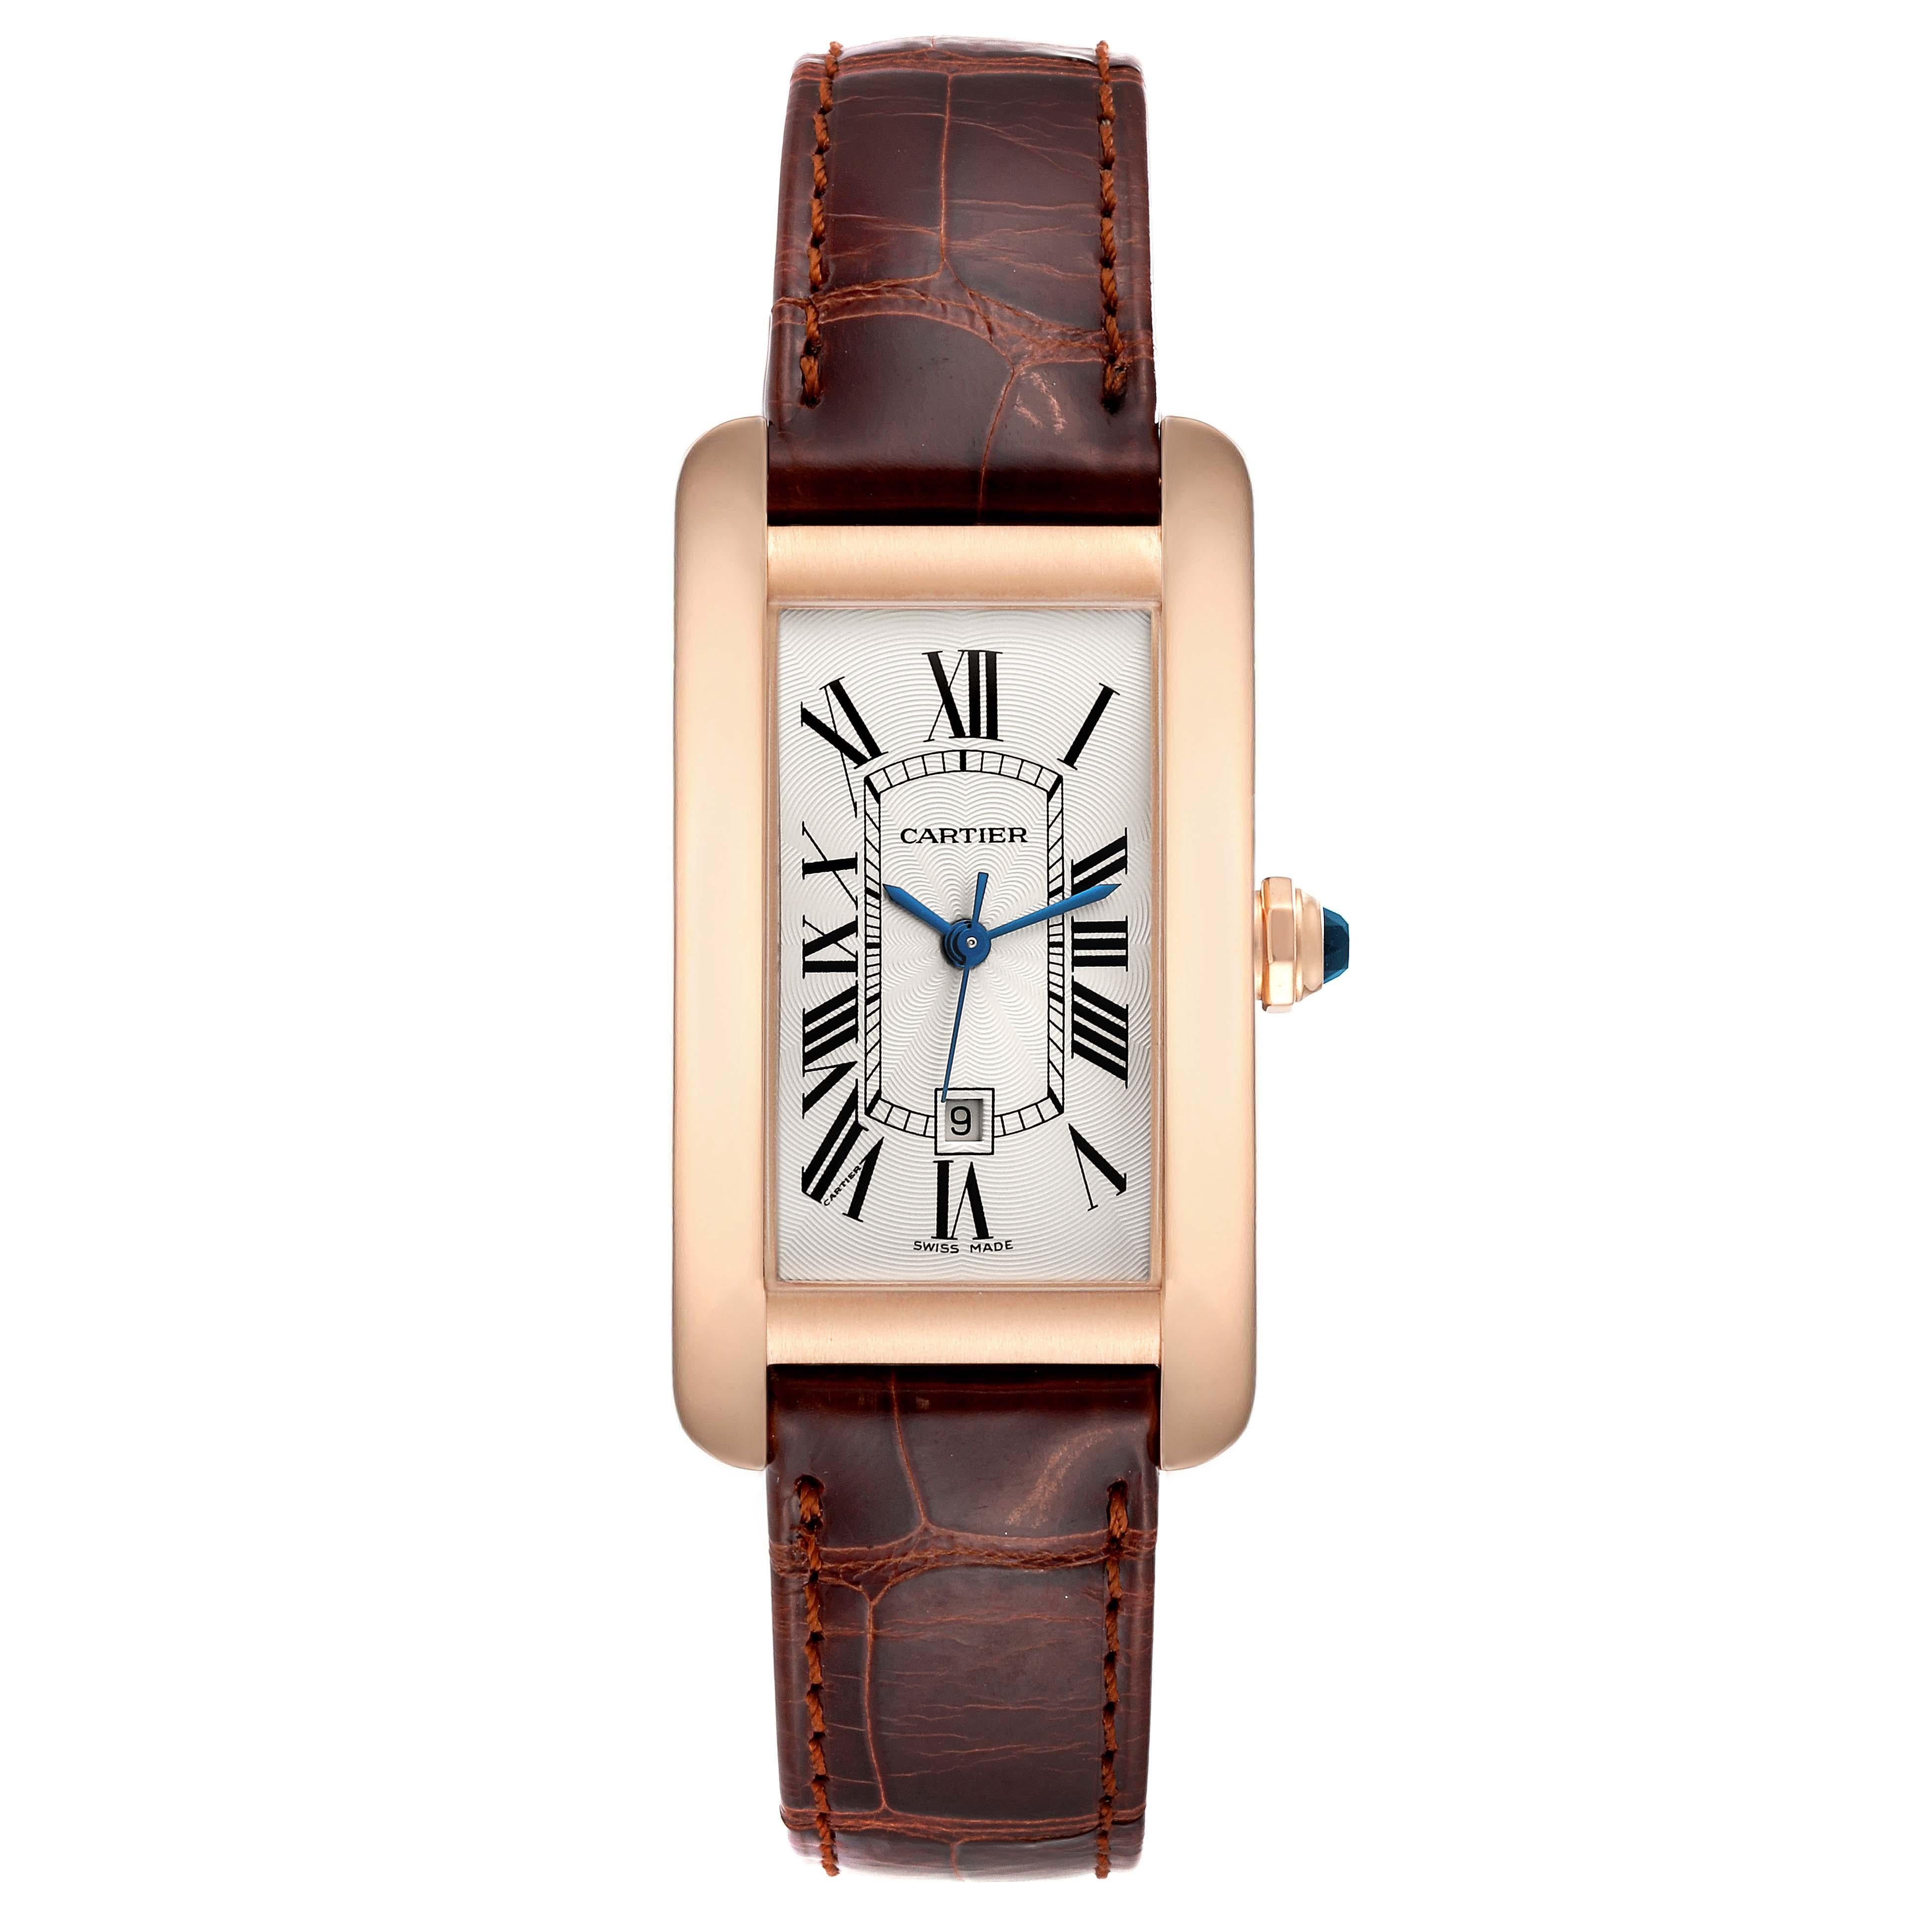 Cartier Tank Americaine Midsize Rose Gold Ladies Watch W2620030 Box Papers. Automatic self-winding movement. 18K rose gold case 23.0 x 42.0 mm. Octagonal crown set with a blue faceted sapphire. . Scratch resistant sapphire crystal. Silvered